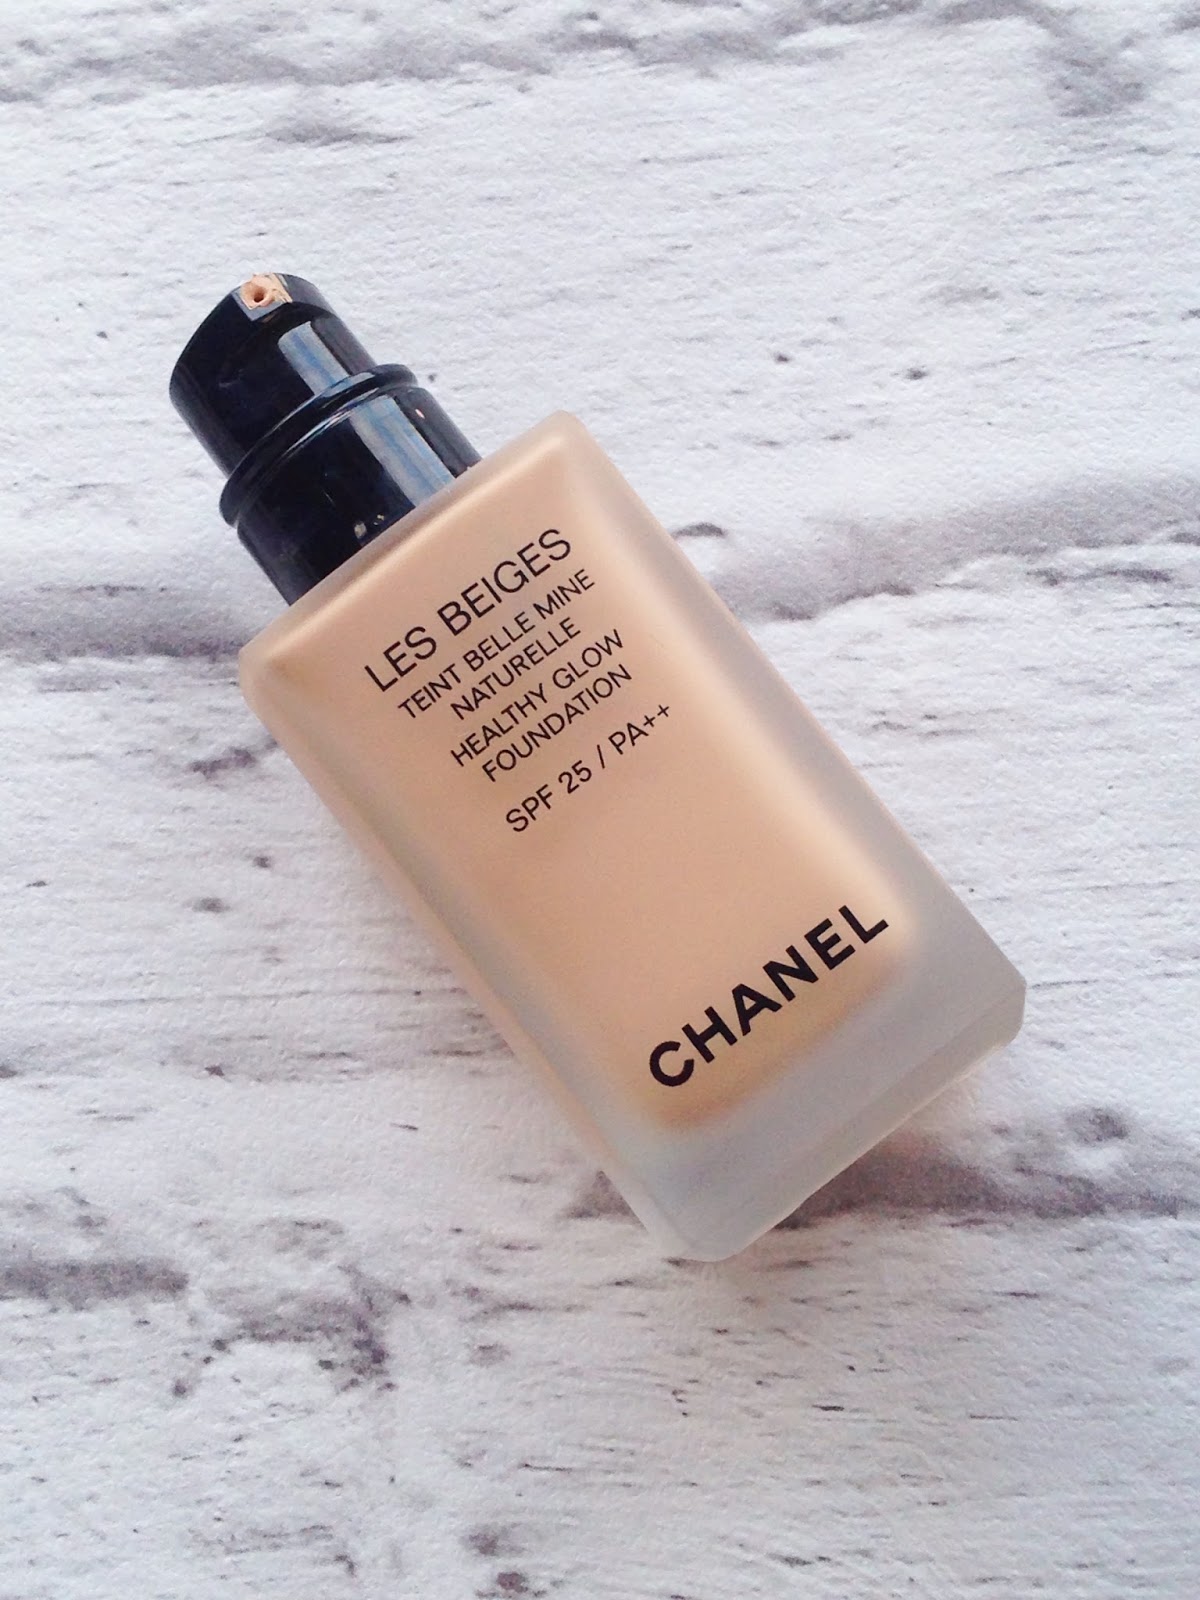 NEW CHANEL SKINCARE FIRST IMPRESSIONS